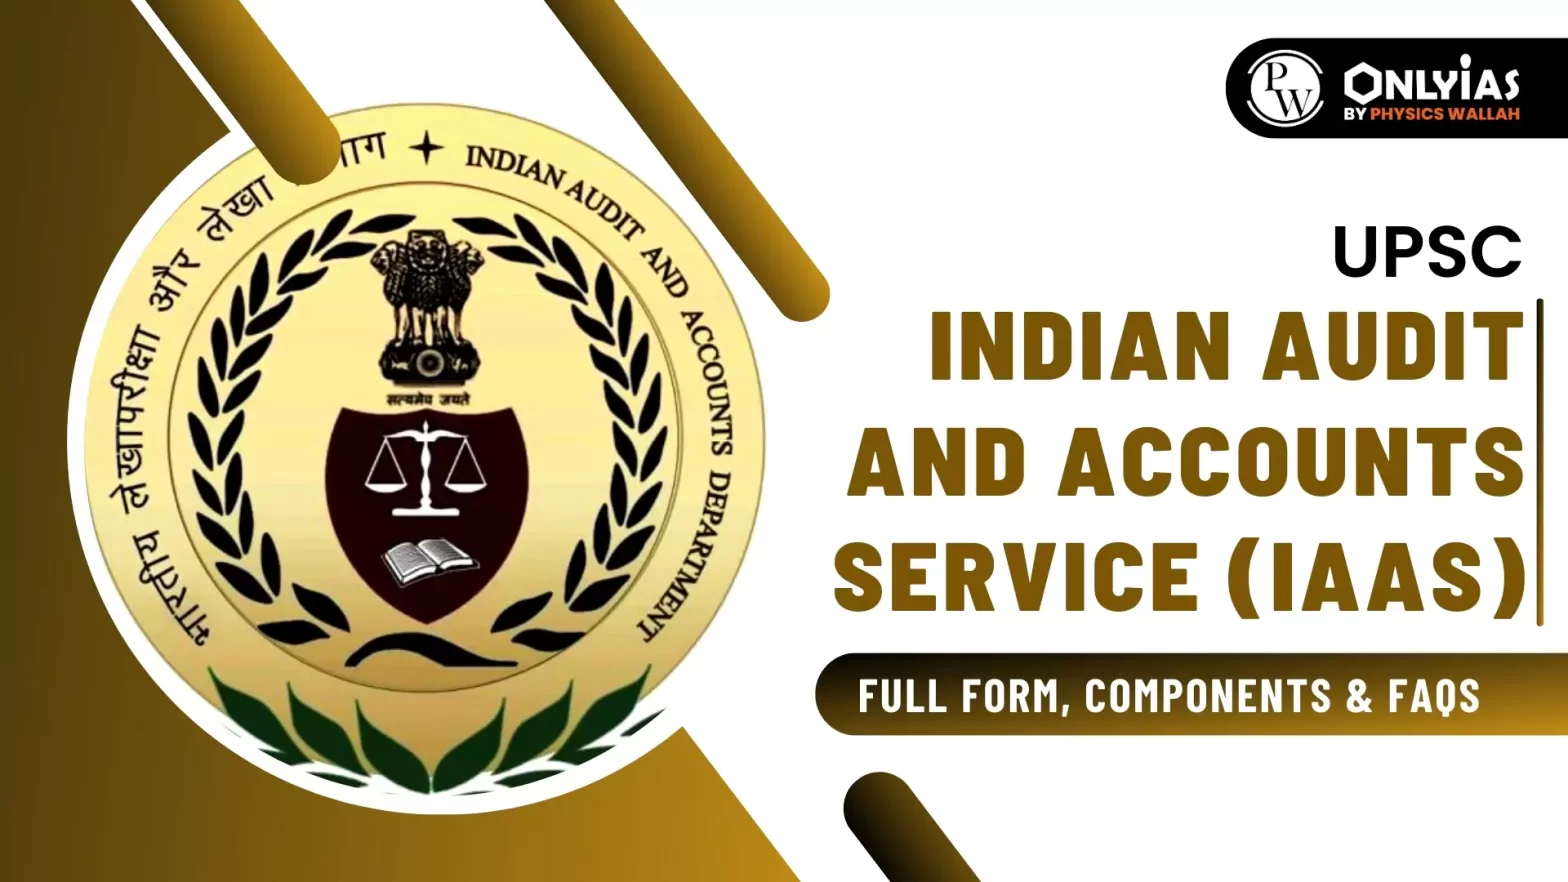 UPSC Indian Audit and Accounts Service (IAAS): Full Form, Components & FAQs